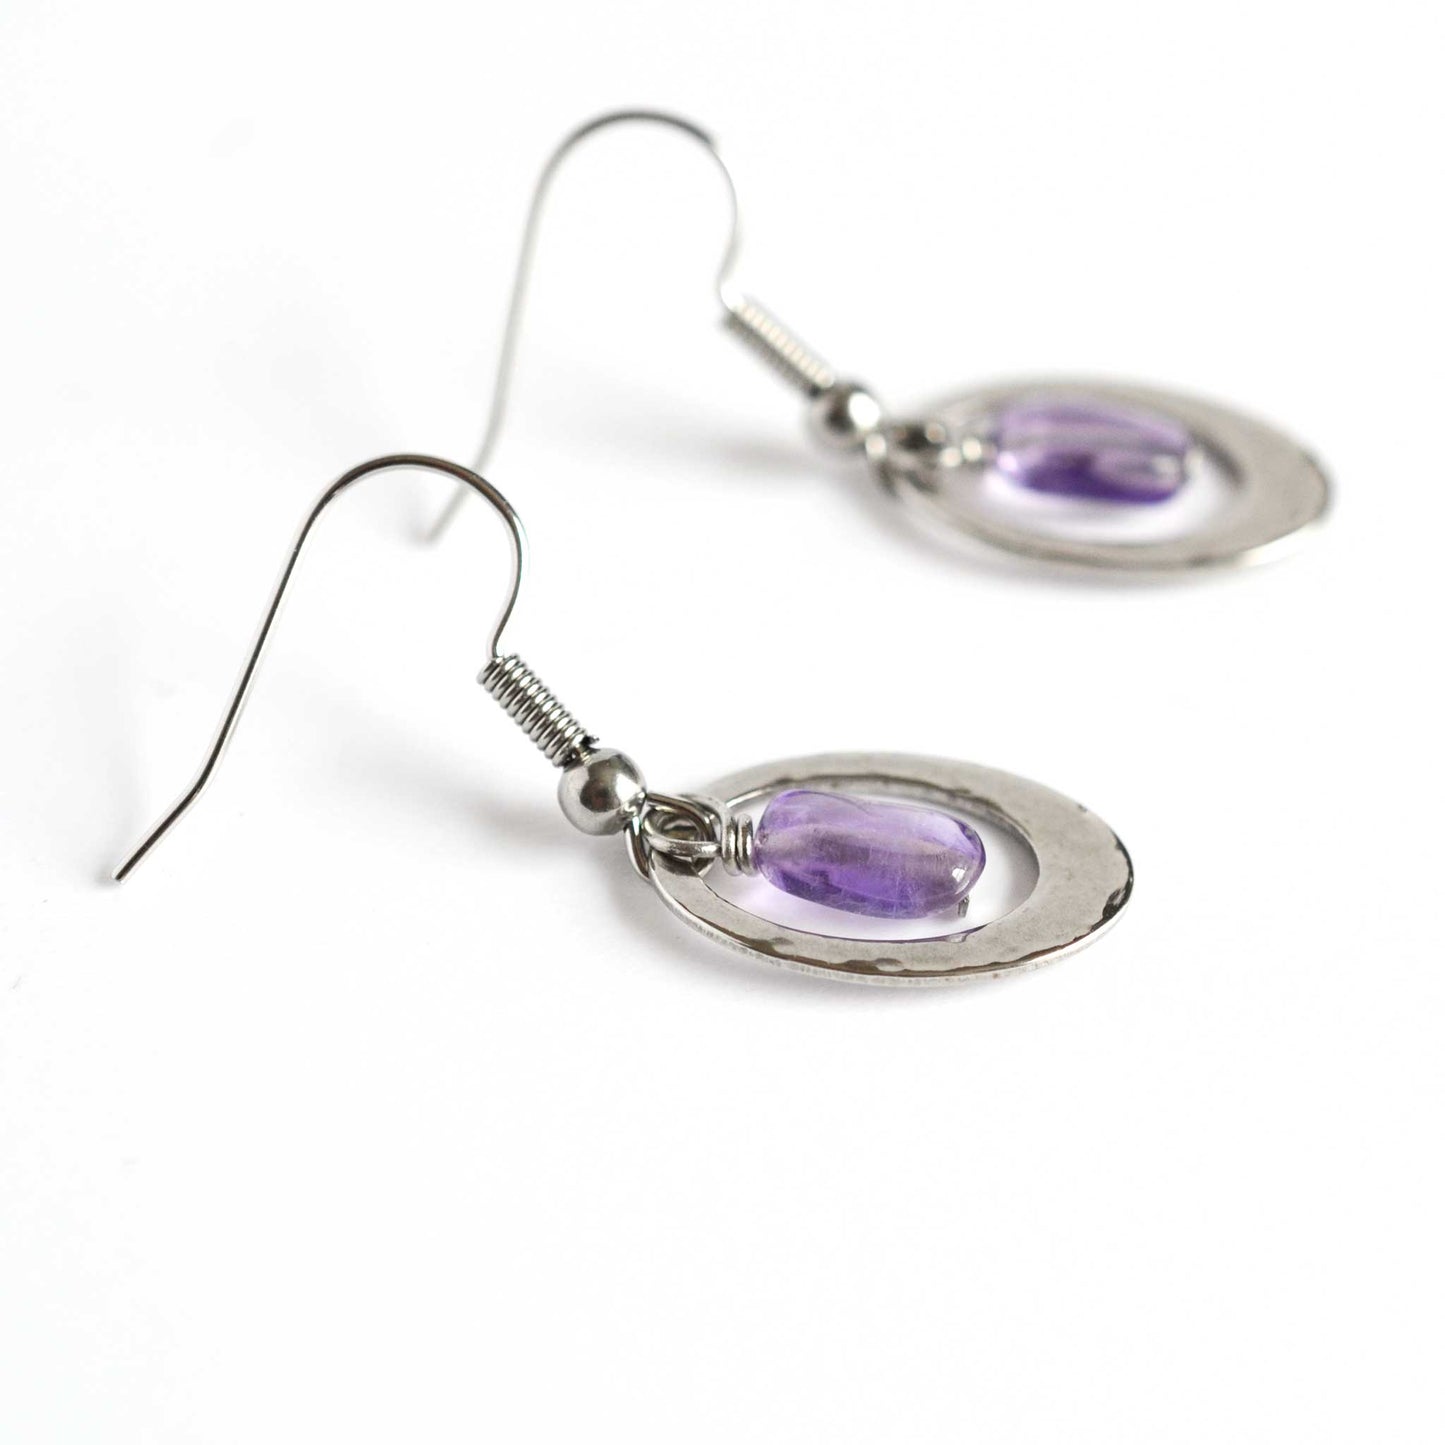 Side view detail of Amethyst oval drop earrings with surgical steel hook.